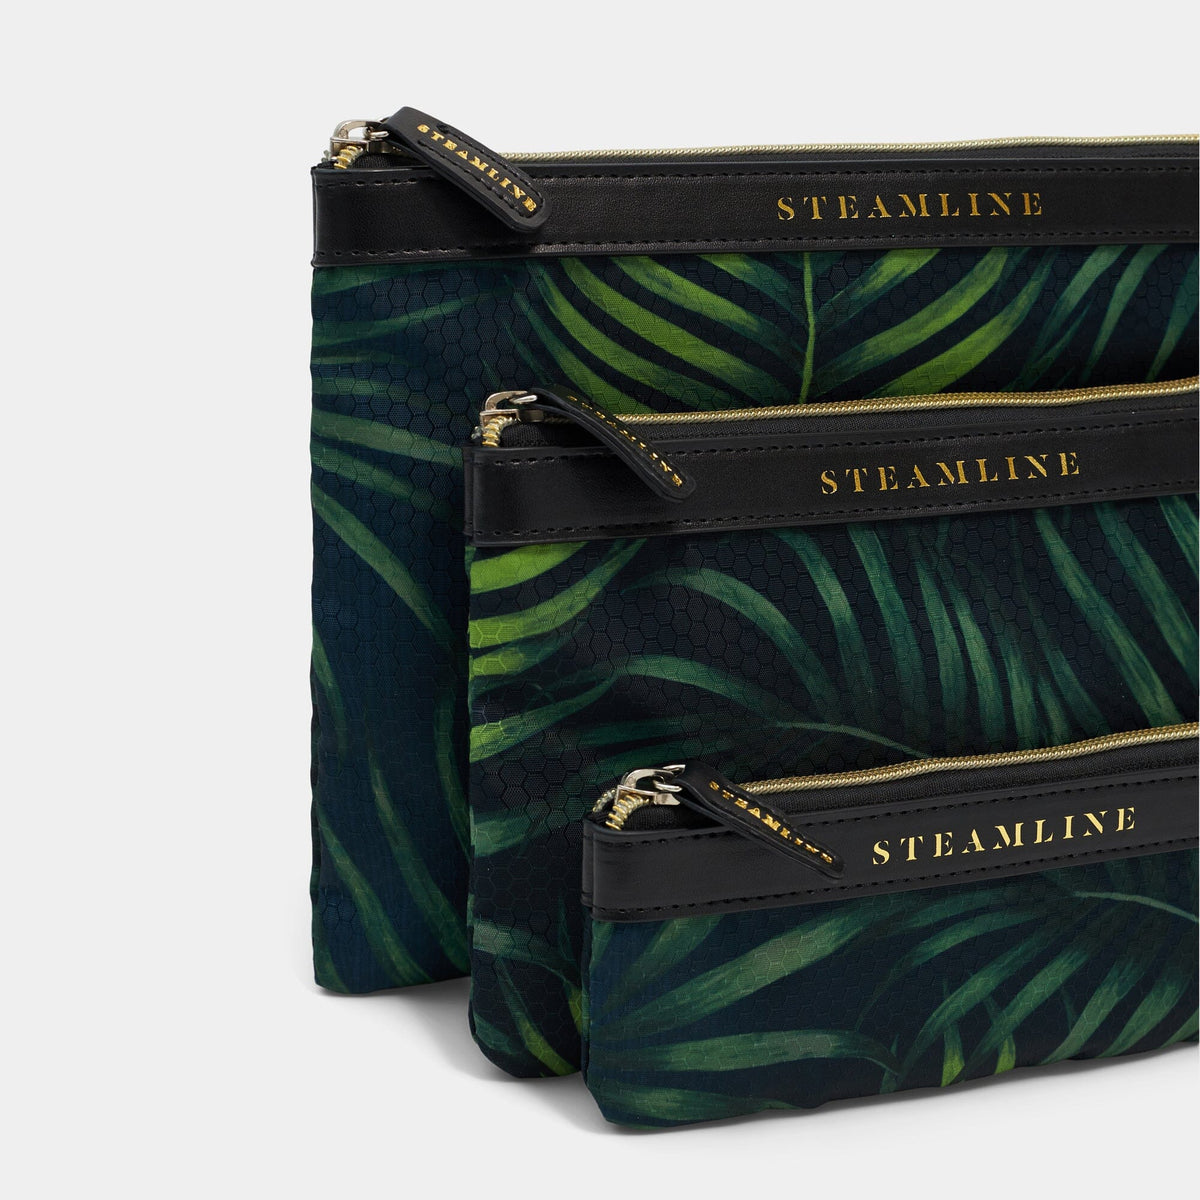 The Palm - Cosmetic Case Set